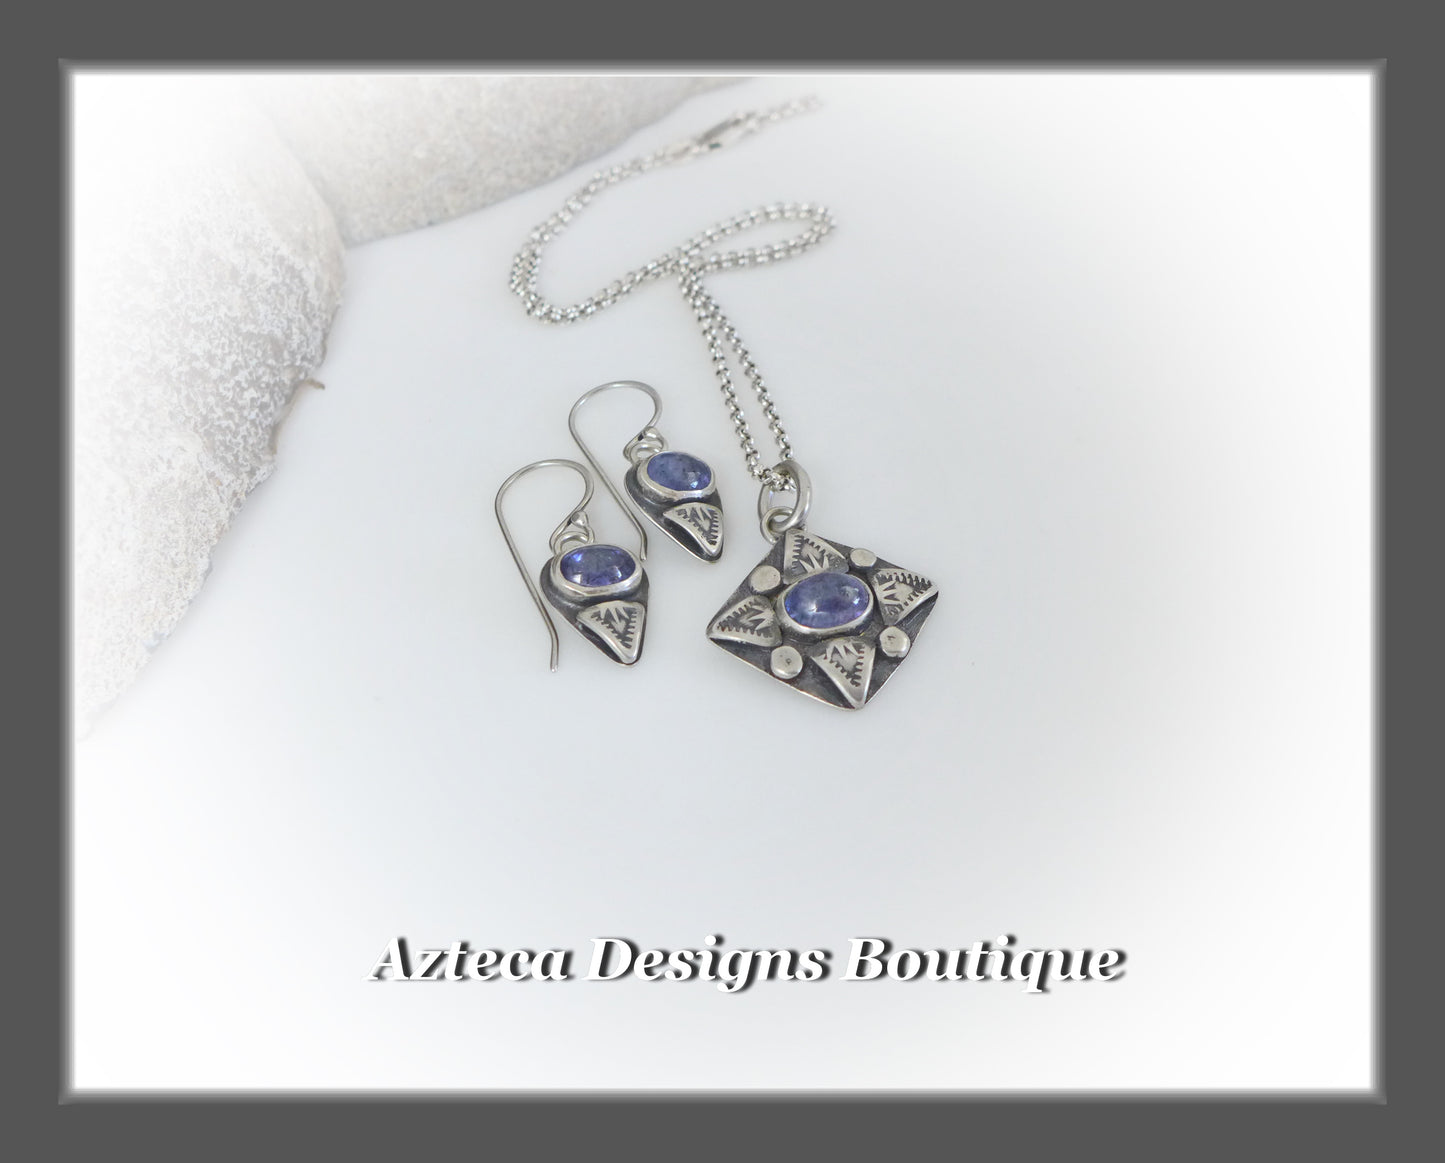 Tanzanite+Sterling Silver+Hand Fabricated+Necklace+Earrings SET